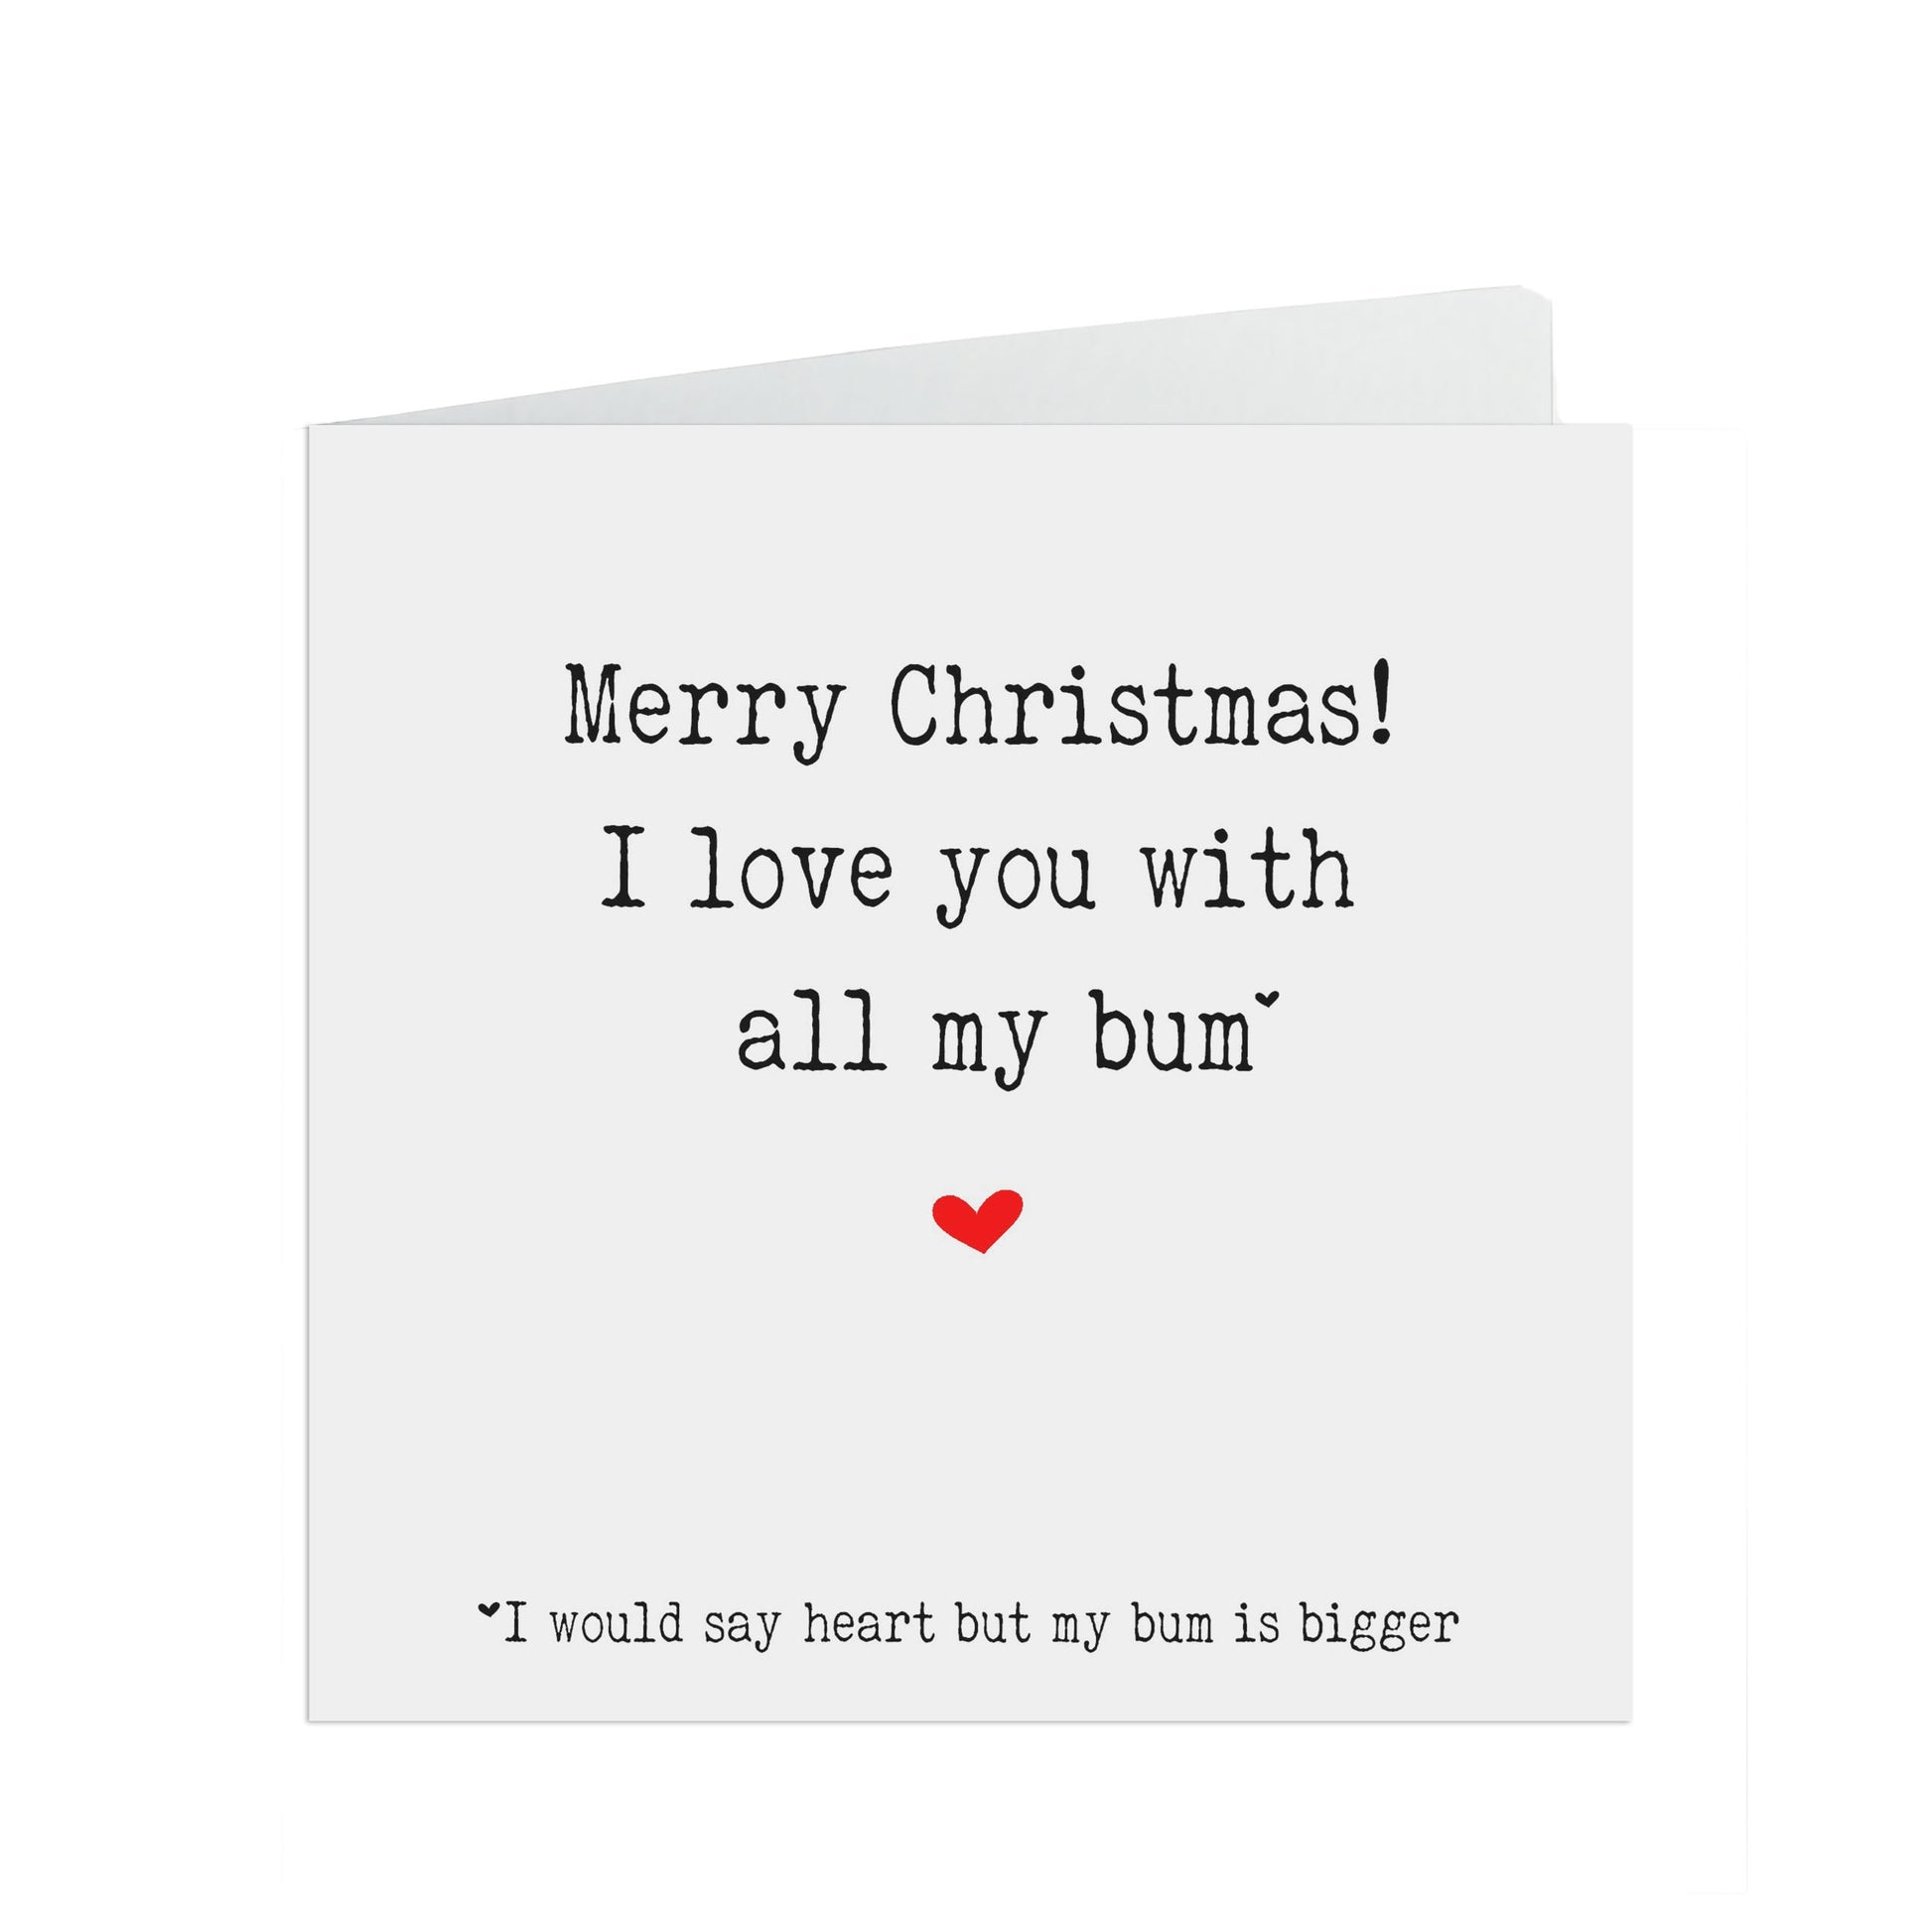 Funny Christmas Card, I Love You With All My Bum, Christmas Card For Husband Or Wife